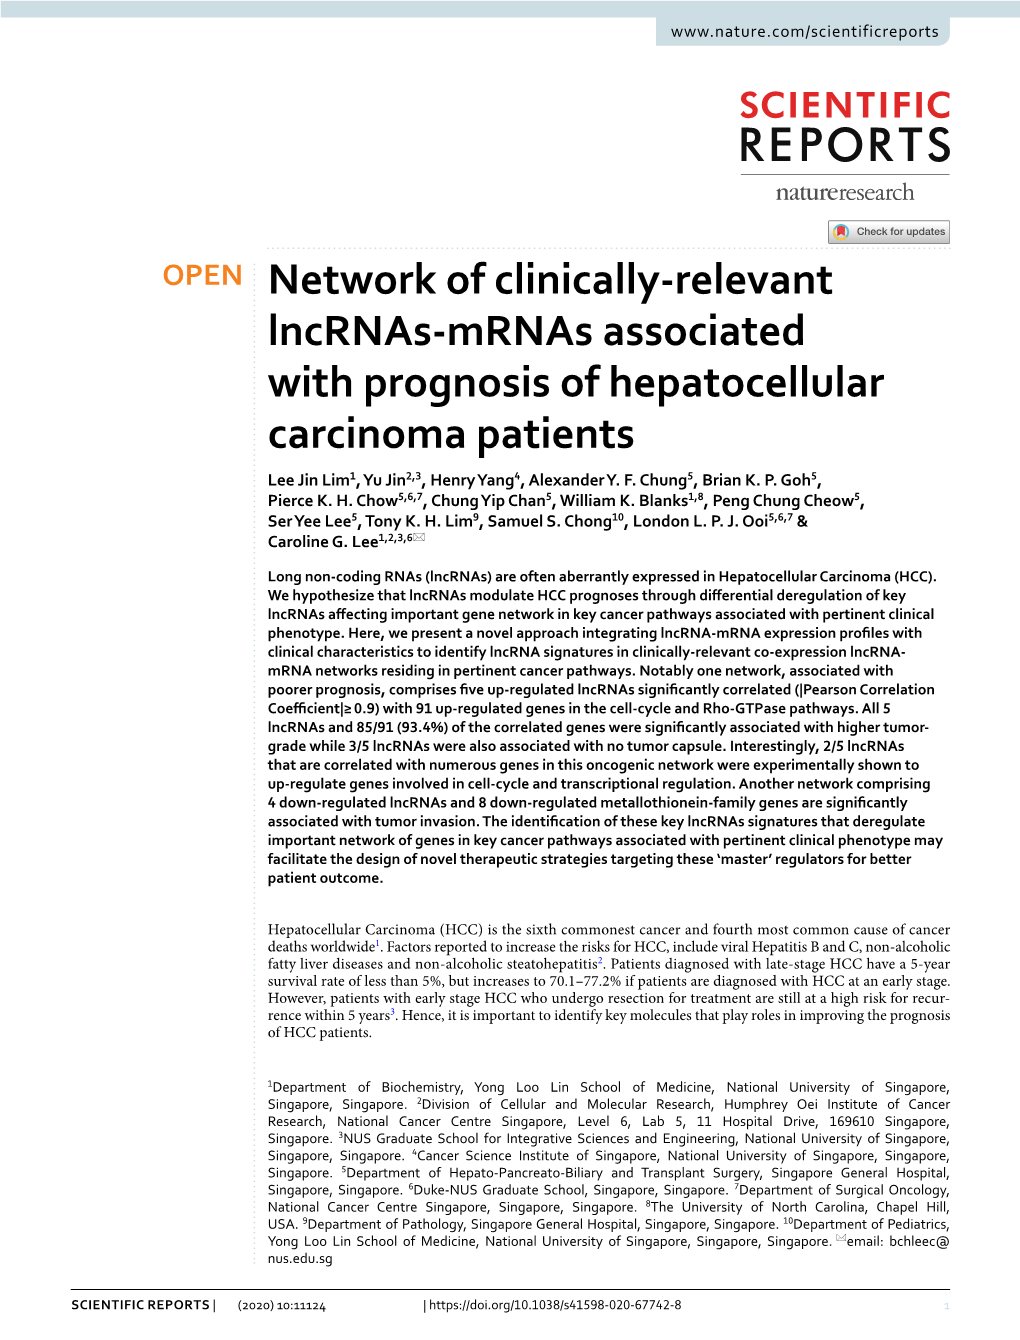 Network of Clinically-Relevant Lncrnas-Mrnas Associated with Prognosis of Hepatocellular Carcinoma Patients